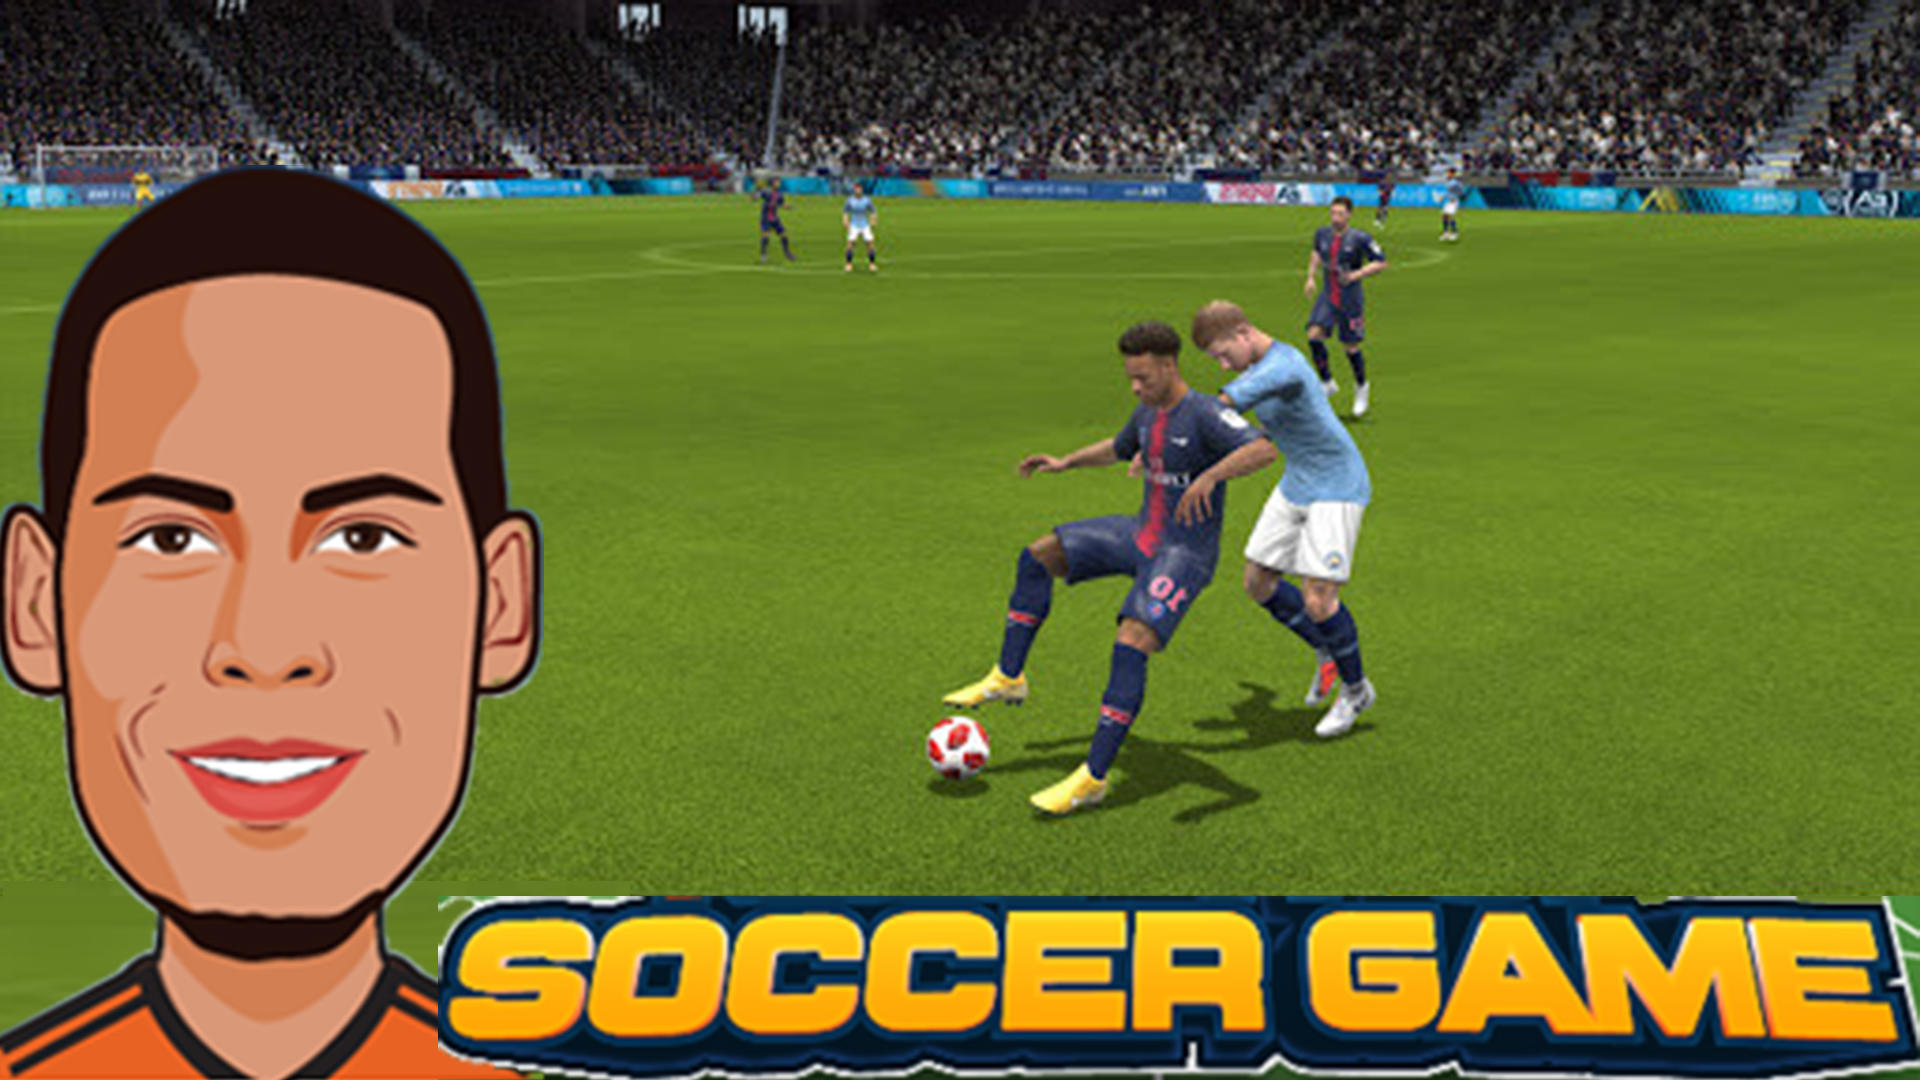 Penalty Shooters 2 - football APK (Android Game) - Free Download